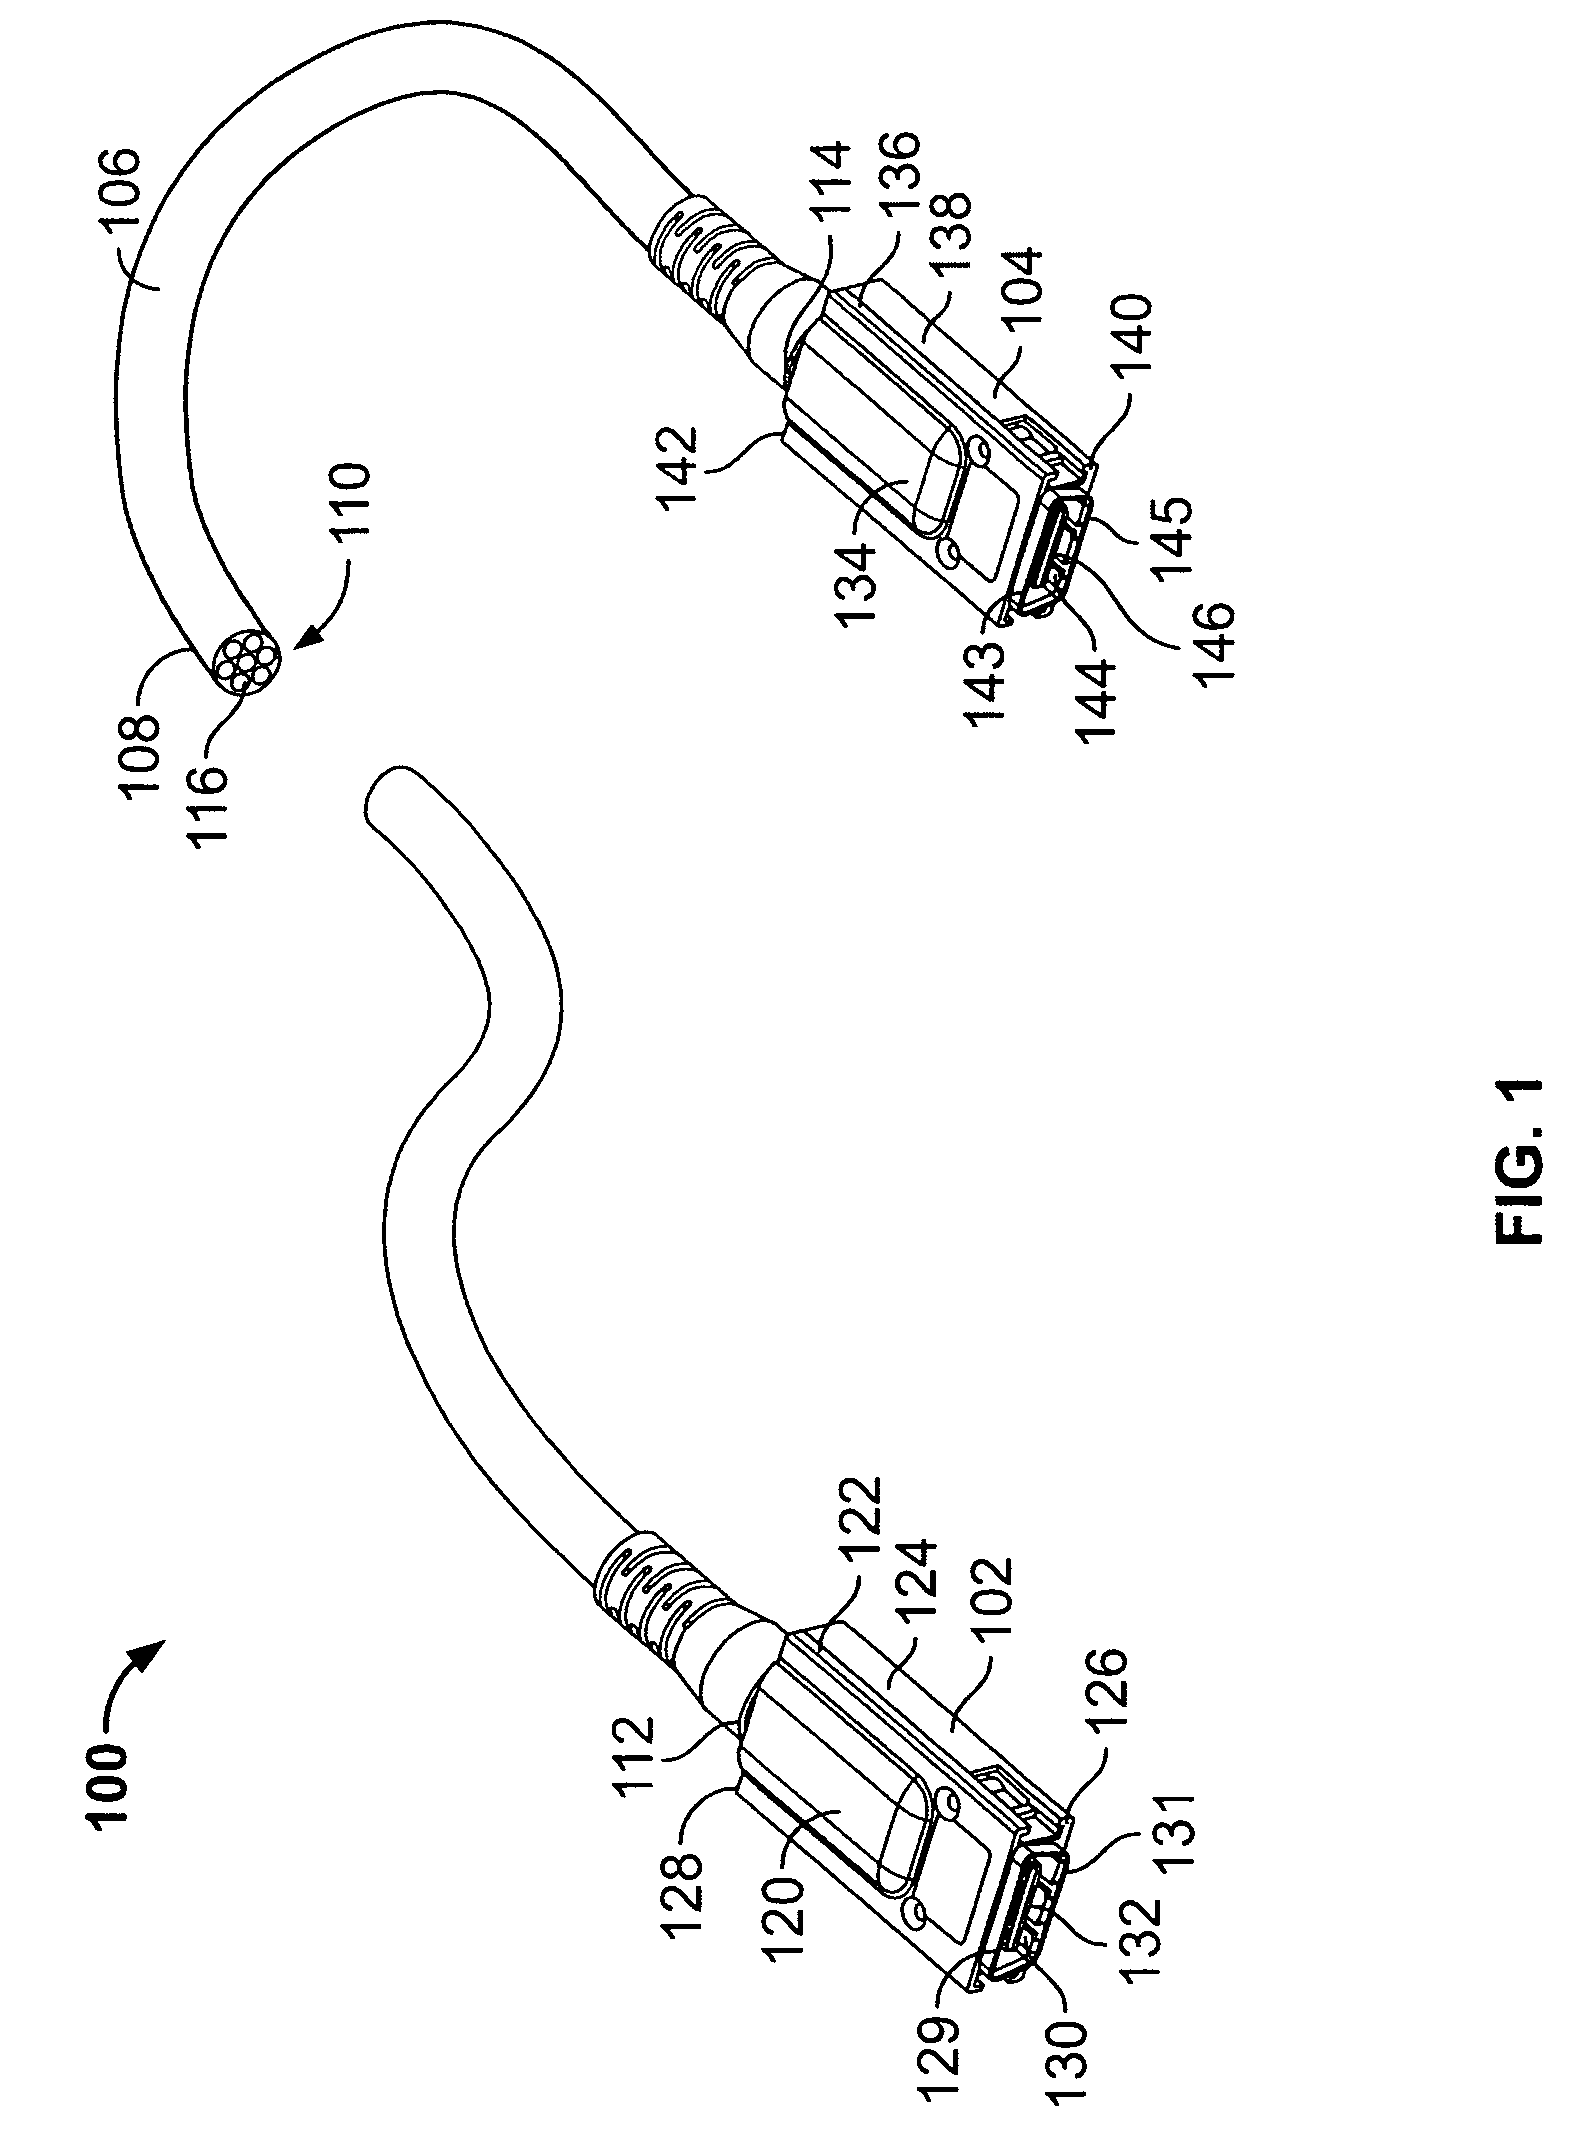 Cable assembly with opposed inverse wire management configurations